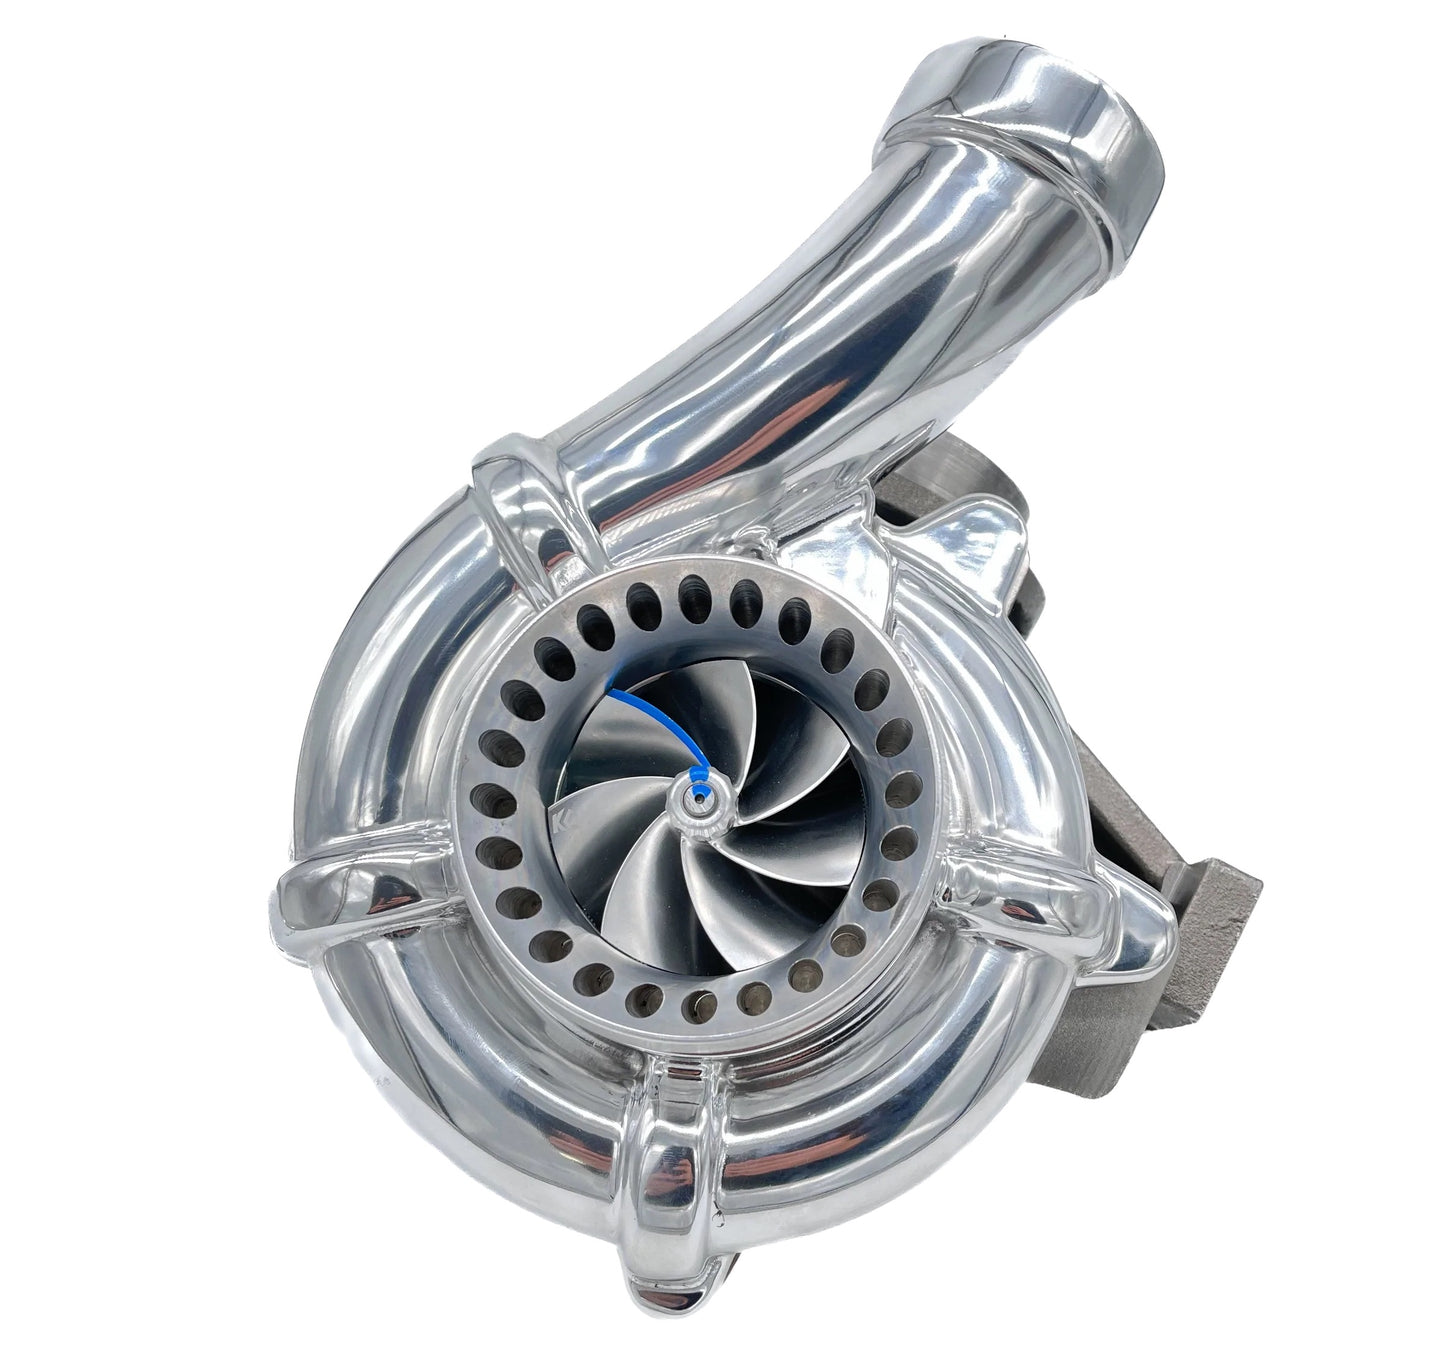 KC Fusion Compound Turbos - (Stage 1 High Pressure & Stage 2 Low Pressure Turbos) - 6.4 POWERSTROKE (2008-2010)